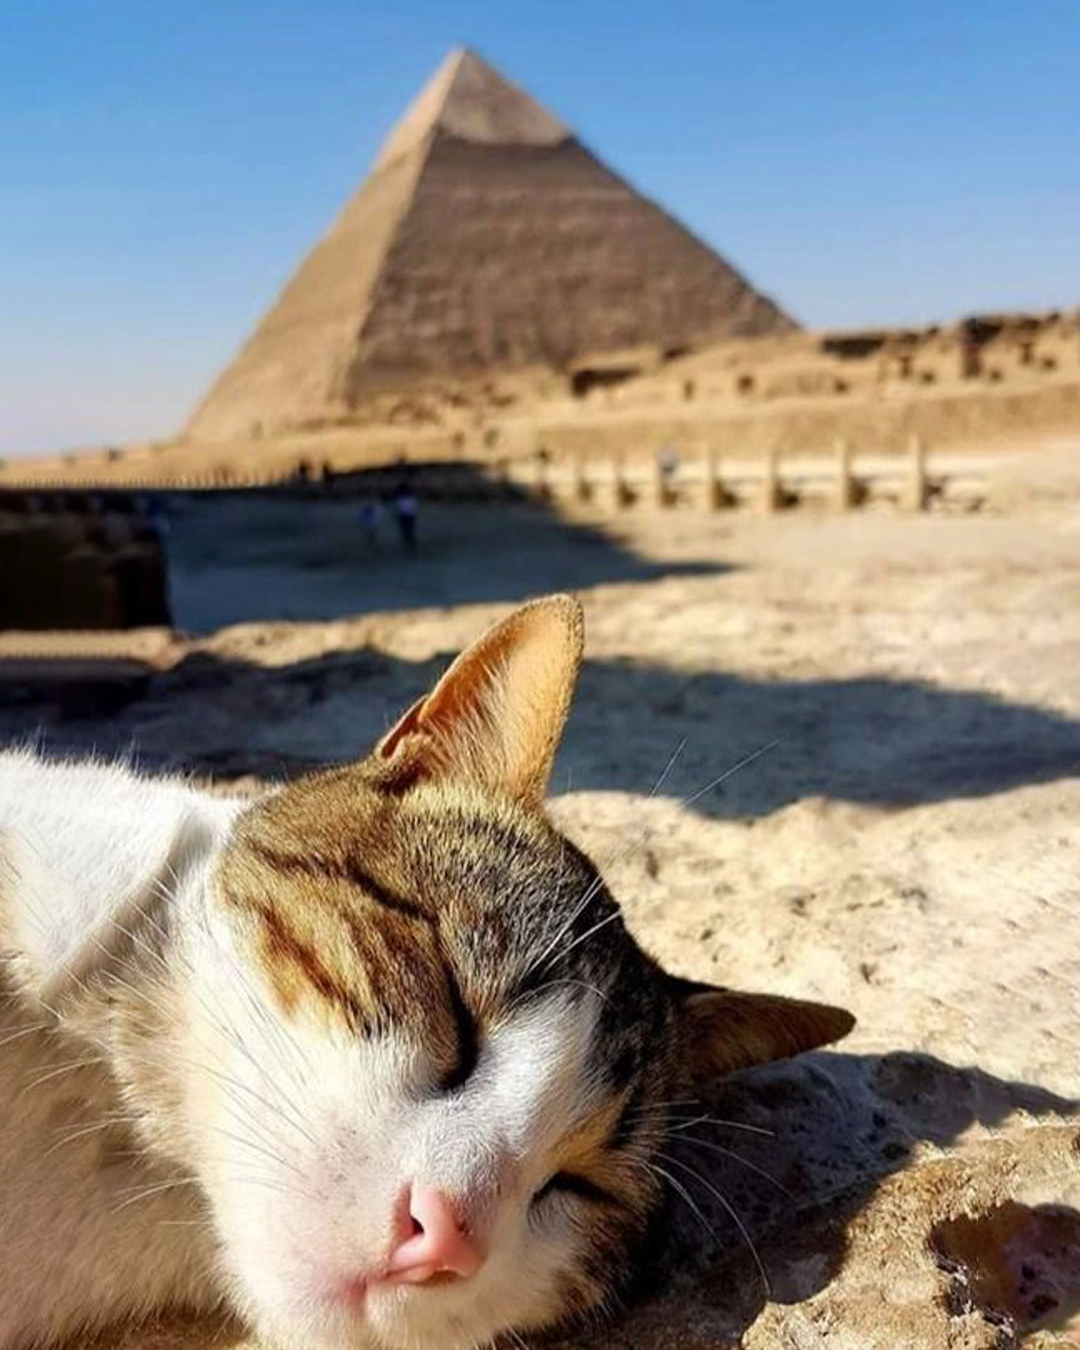 Dreaming of her past lives in Egypt